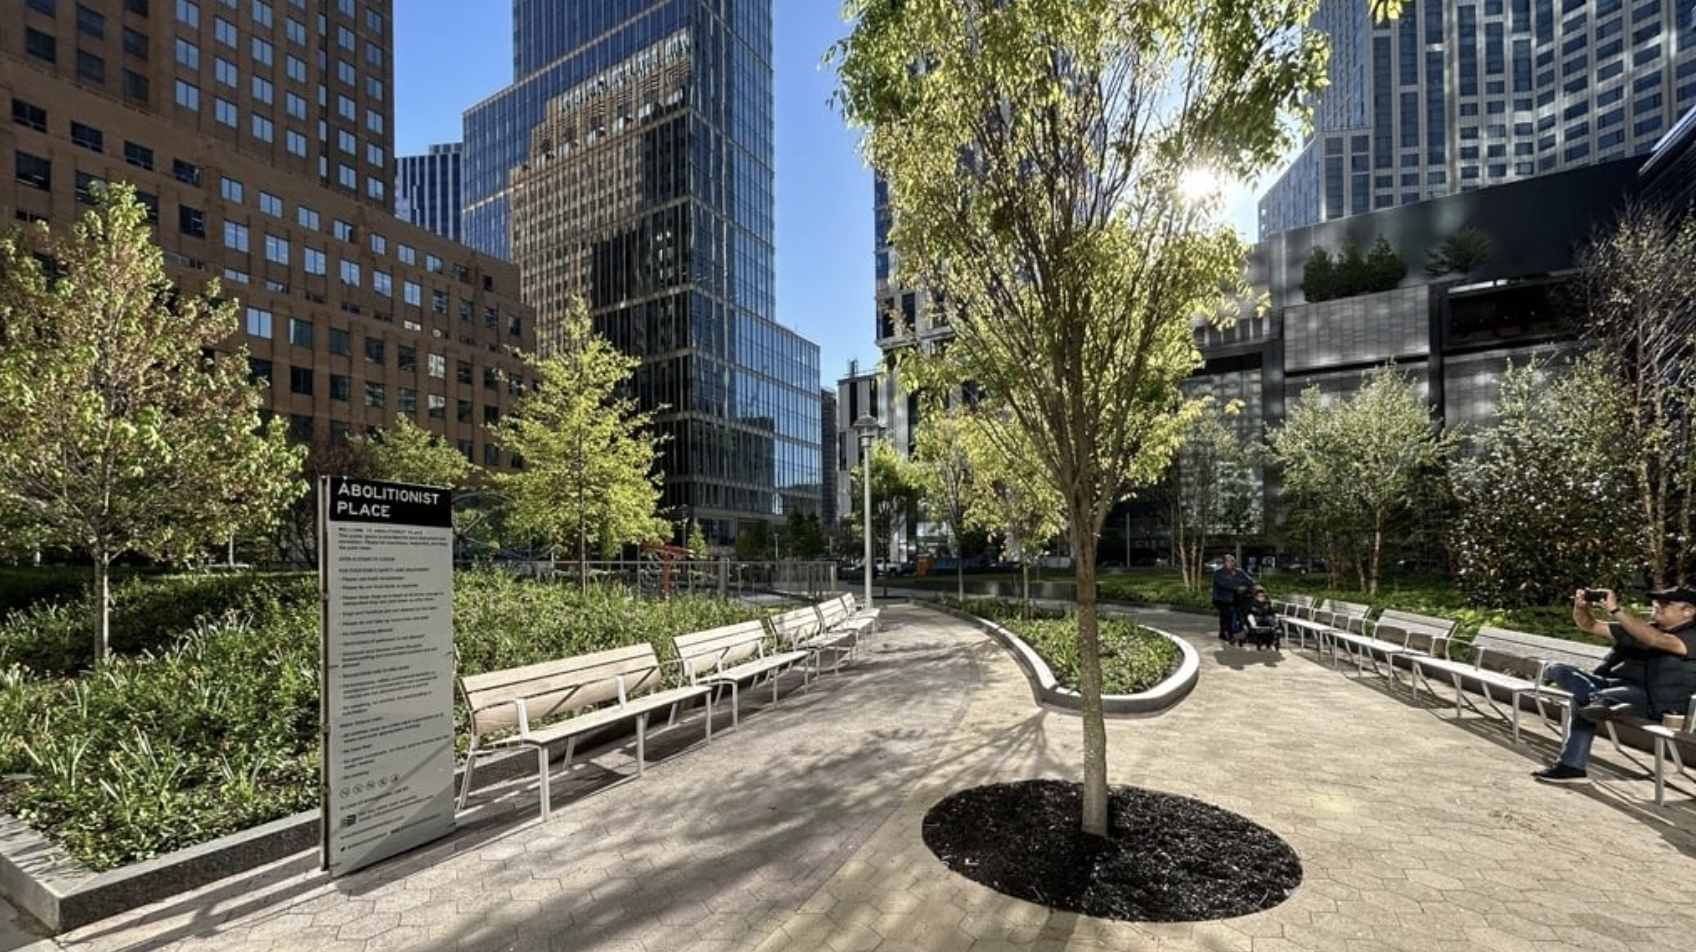 A new park just opened in downtown Brooklyn